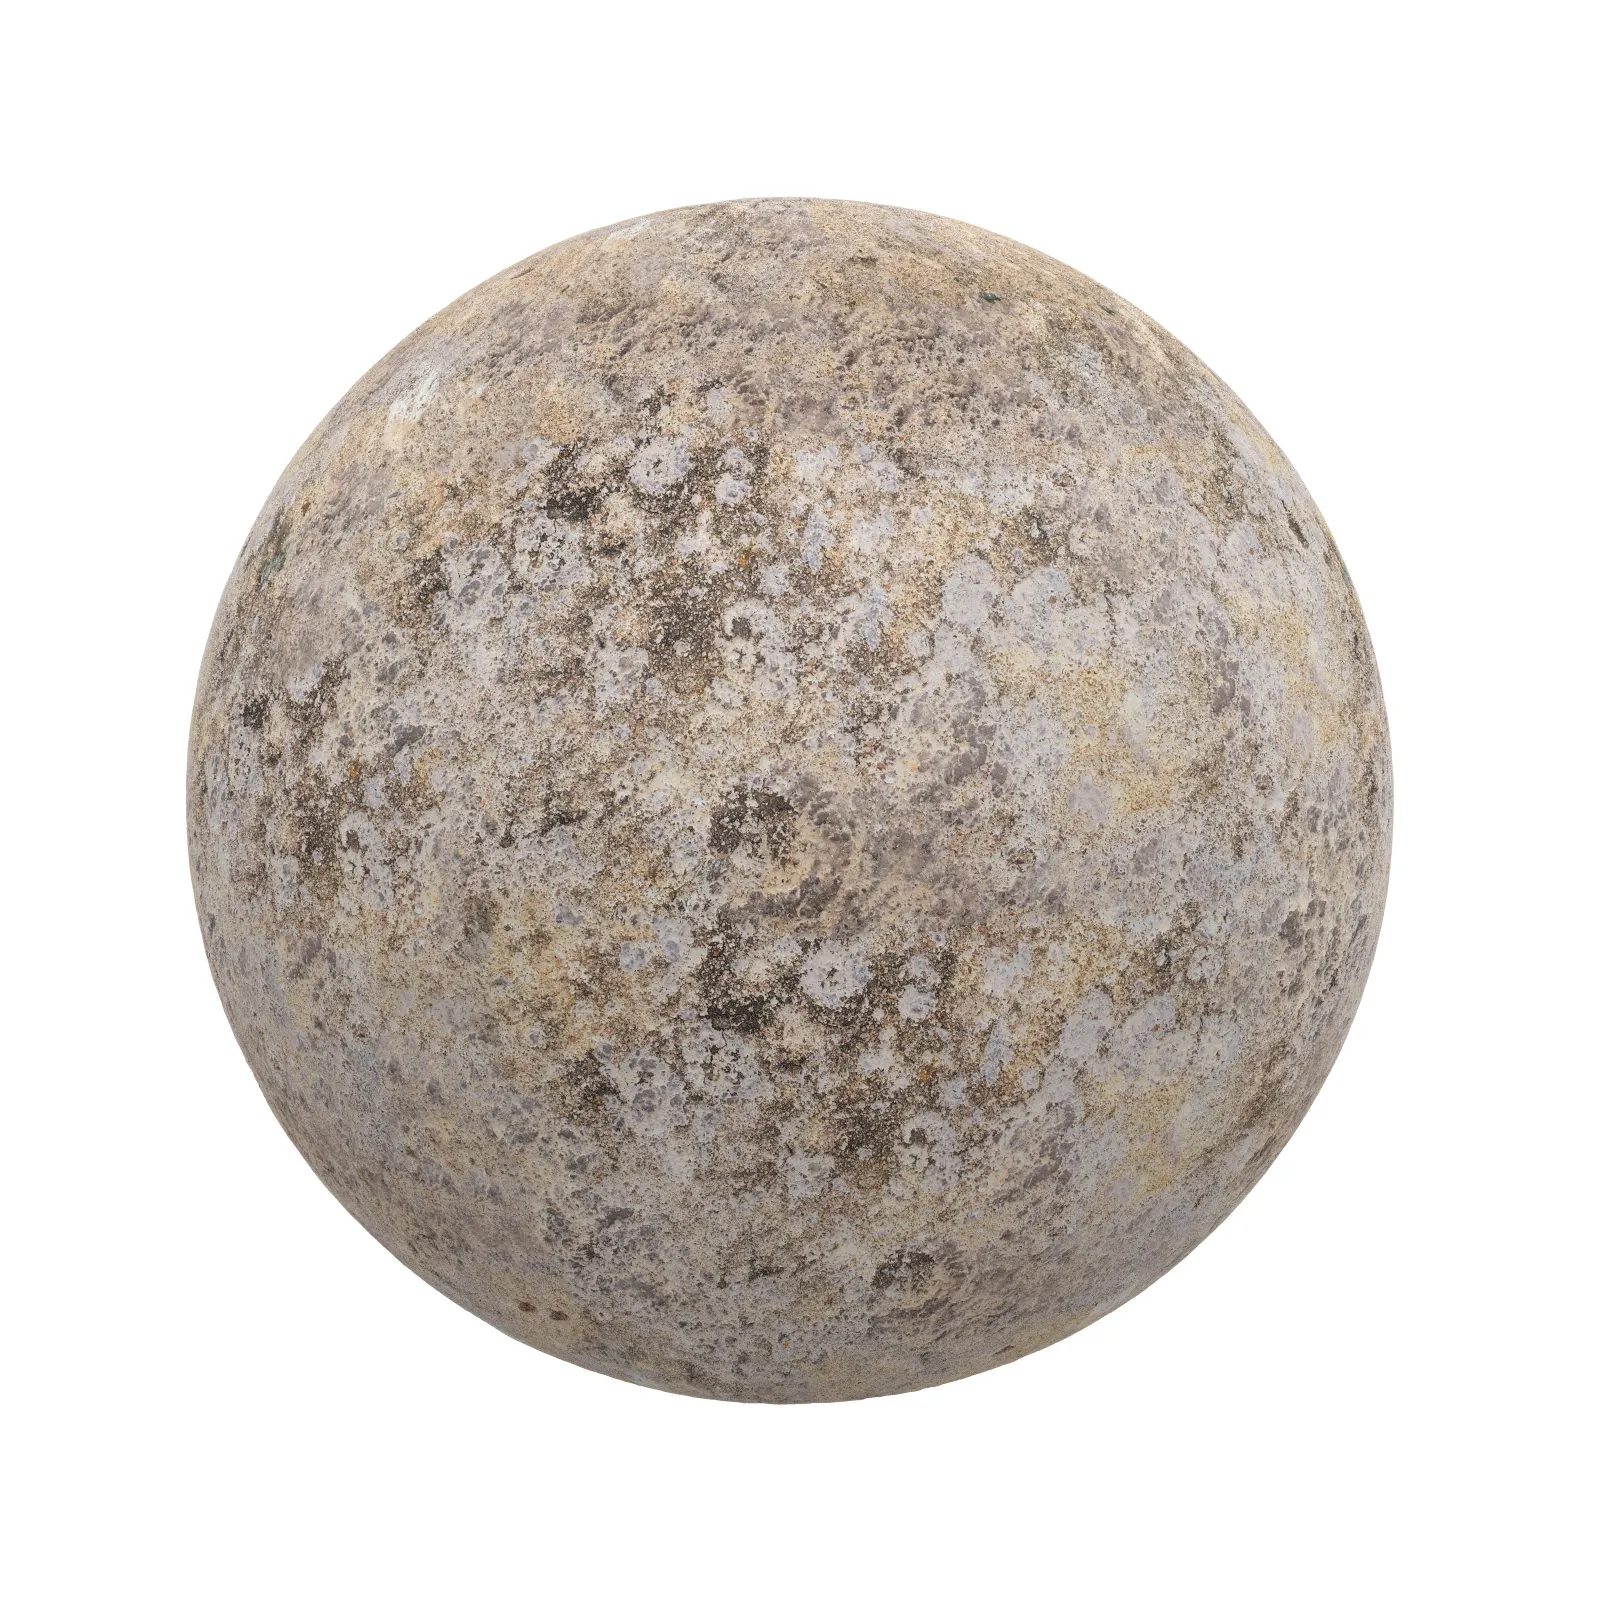 TEXTURES – STONES – CGAxis PBR Colection Vol 1 Stones – beige rough stone